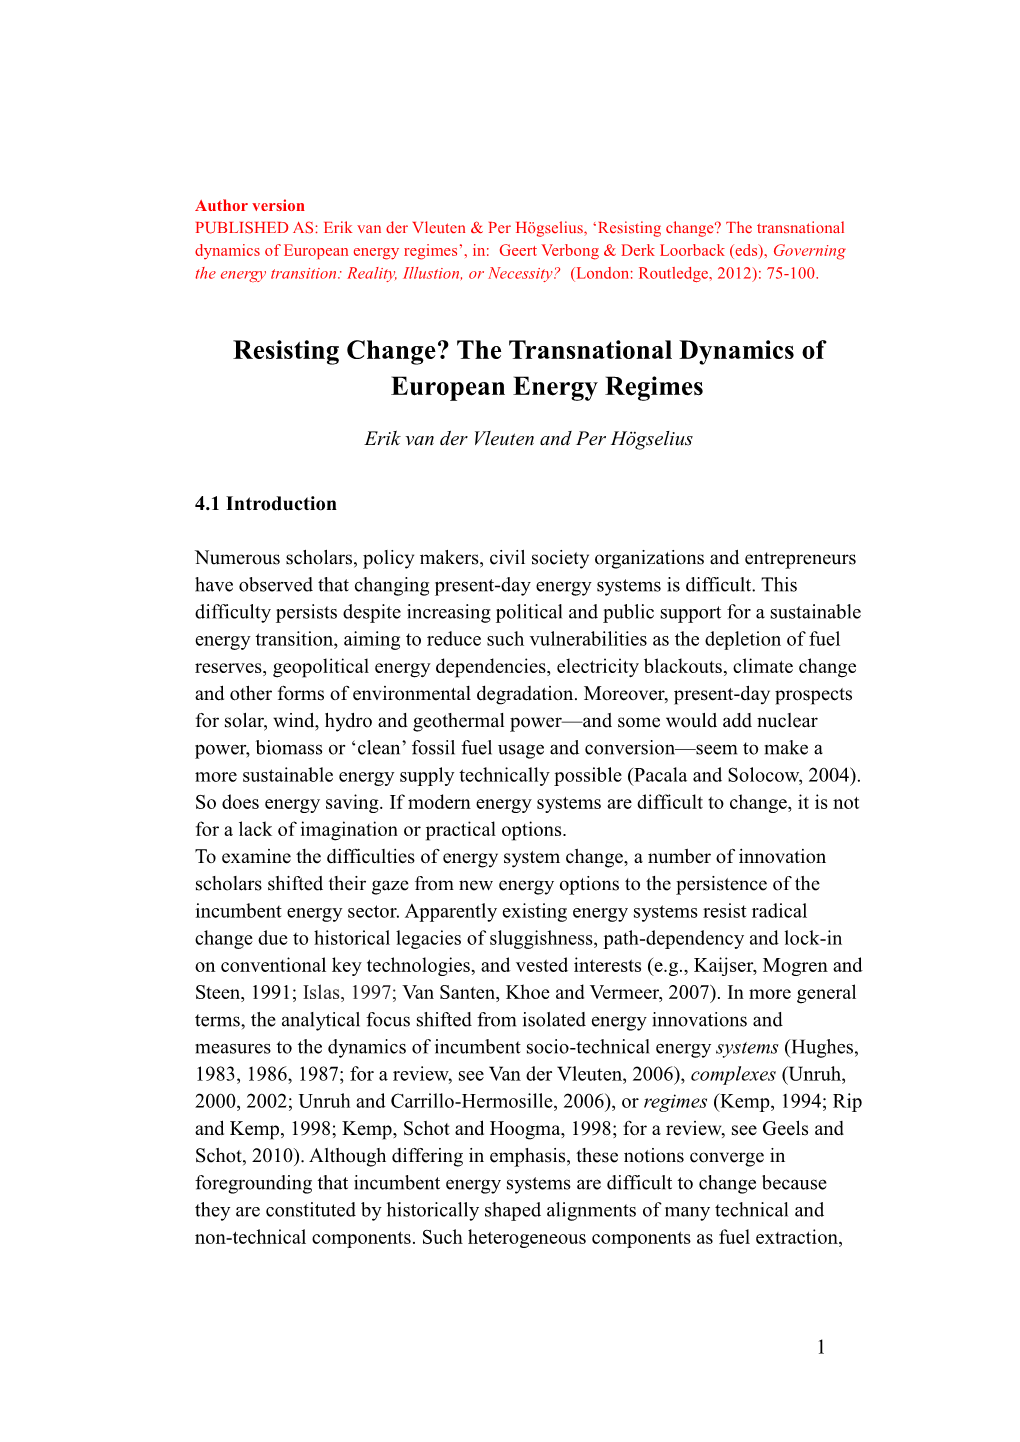 Resisting Change? the Transnational Dynamics of European Energy